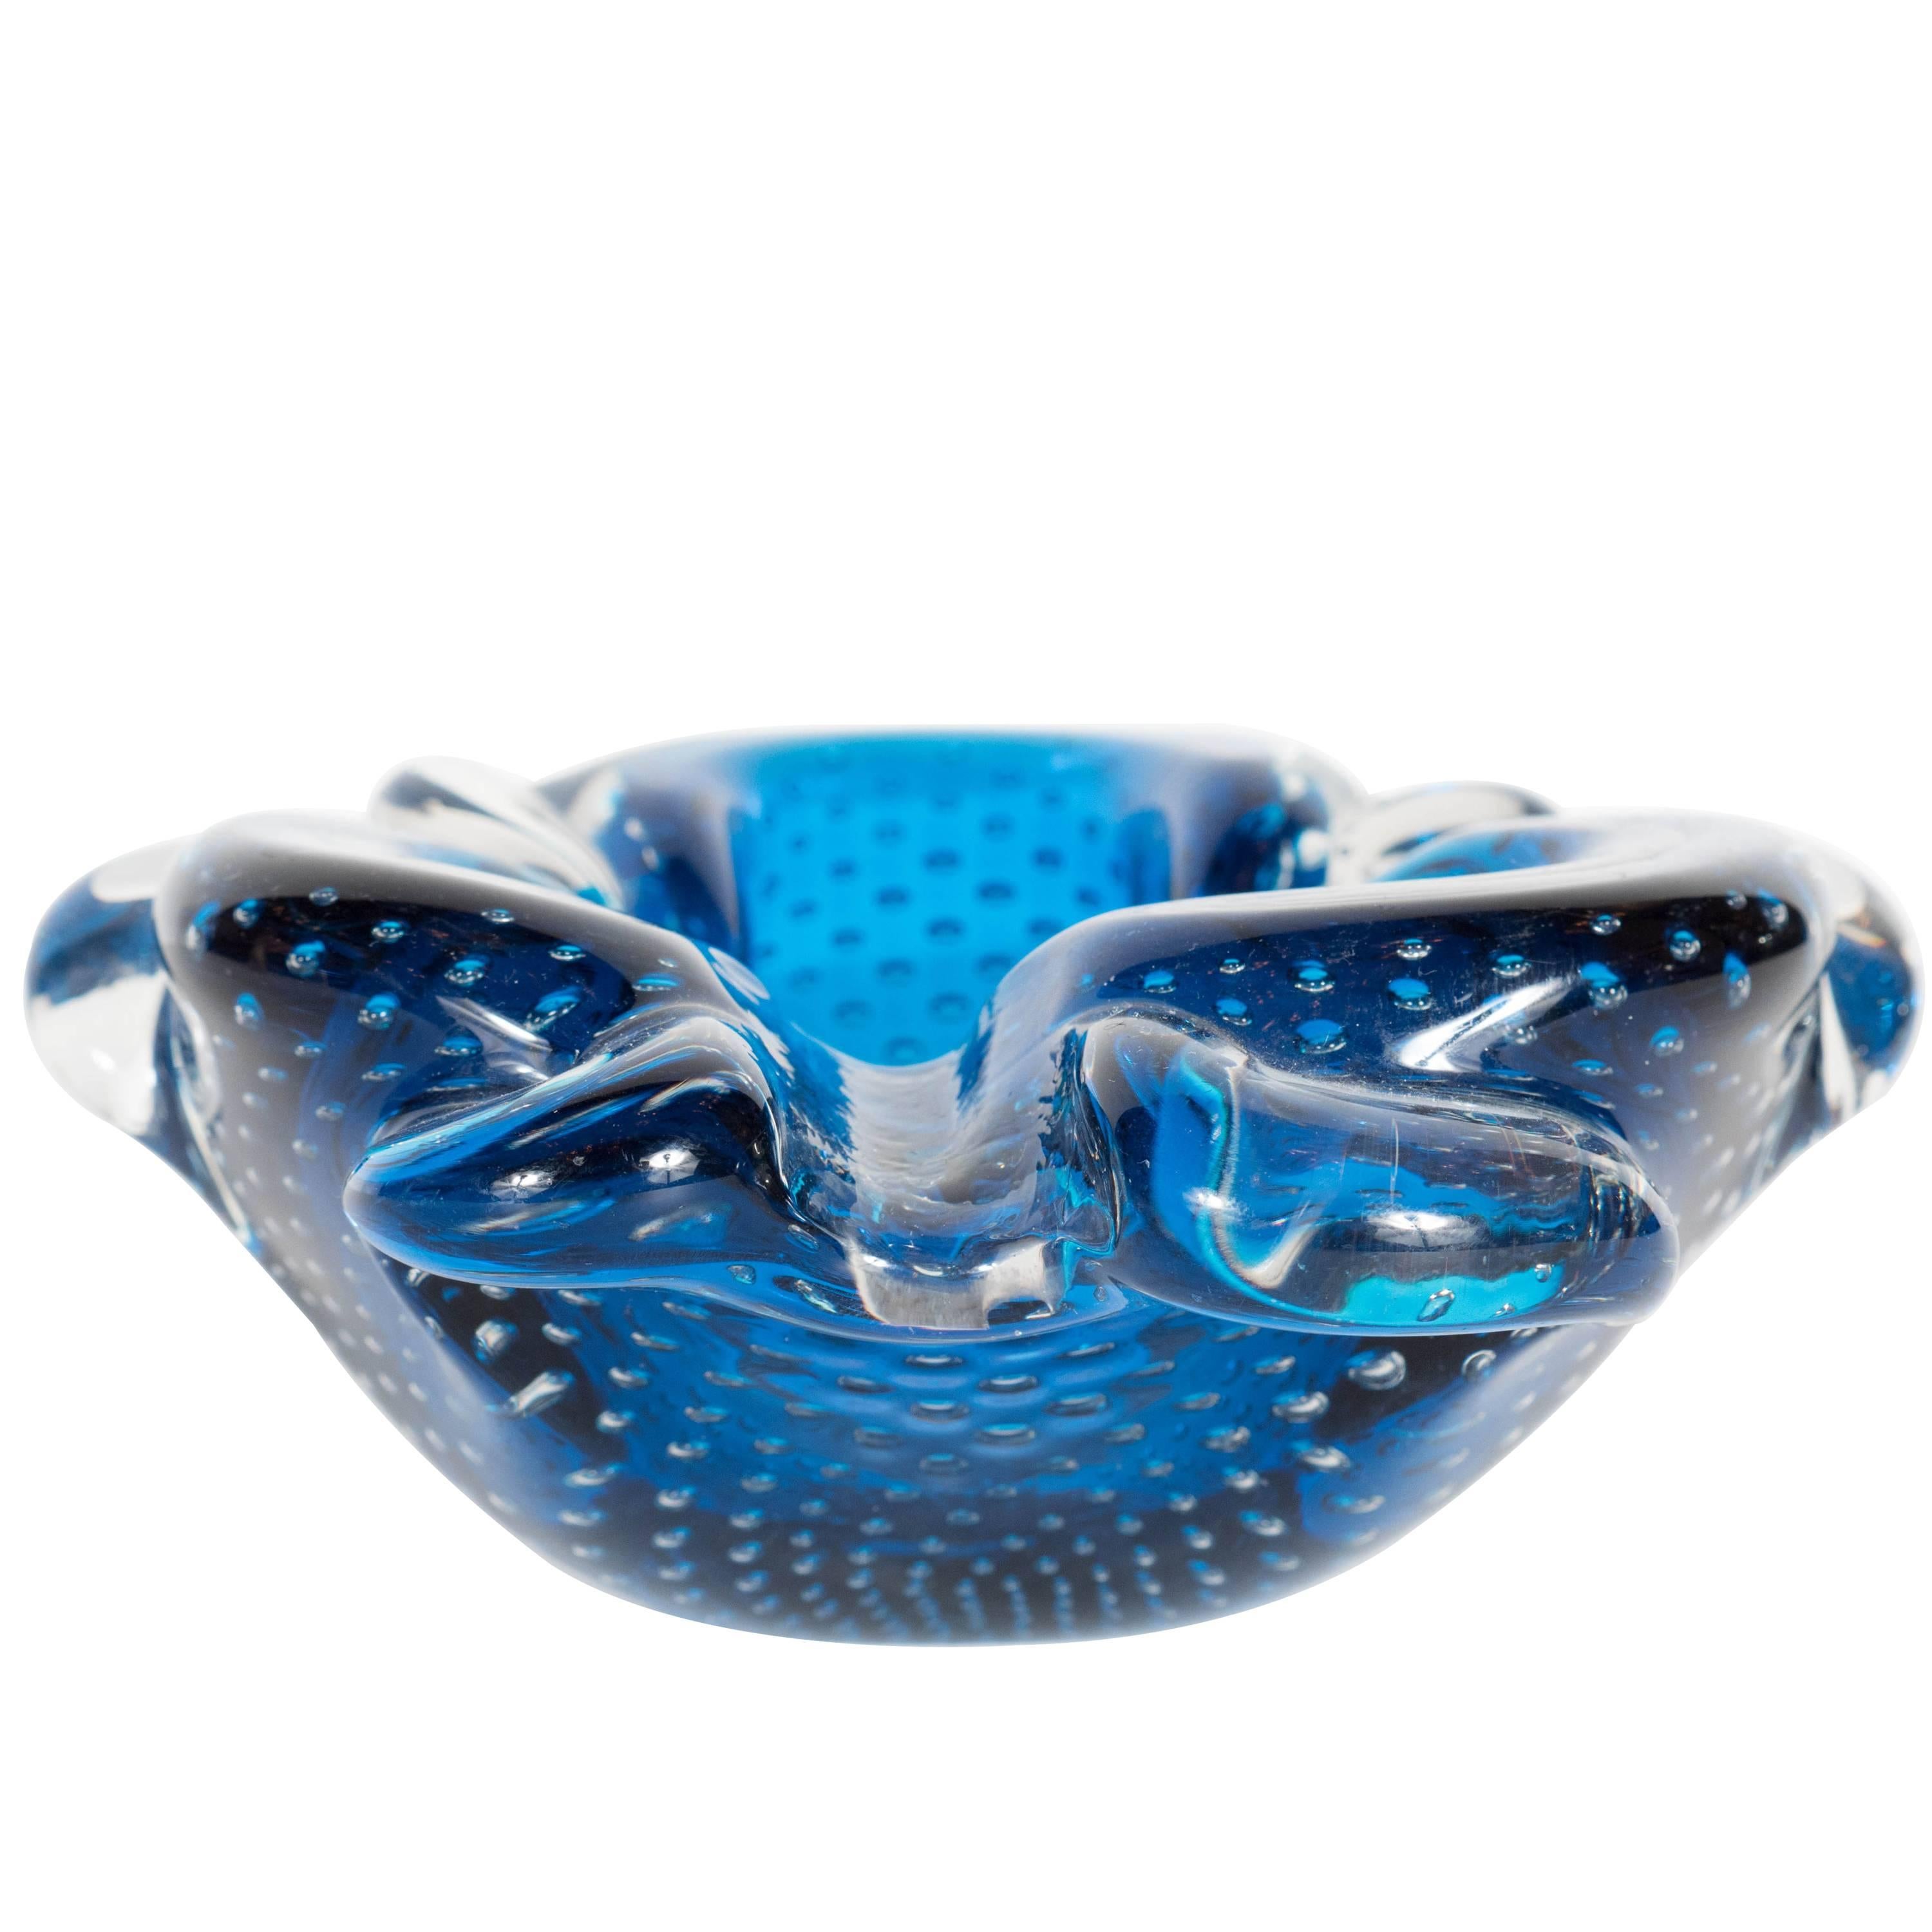 Gorgeous Sapphire-Blue and Clear Murano Glass Bowl or Ashtray